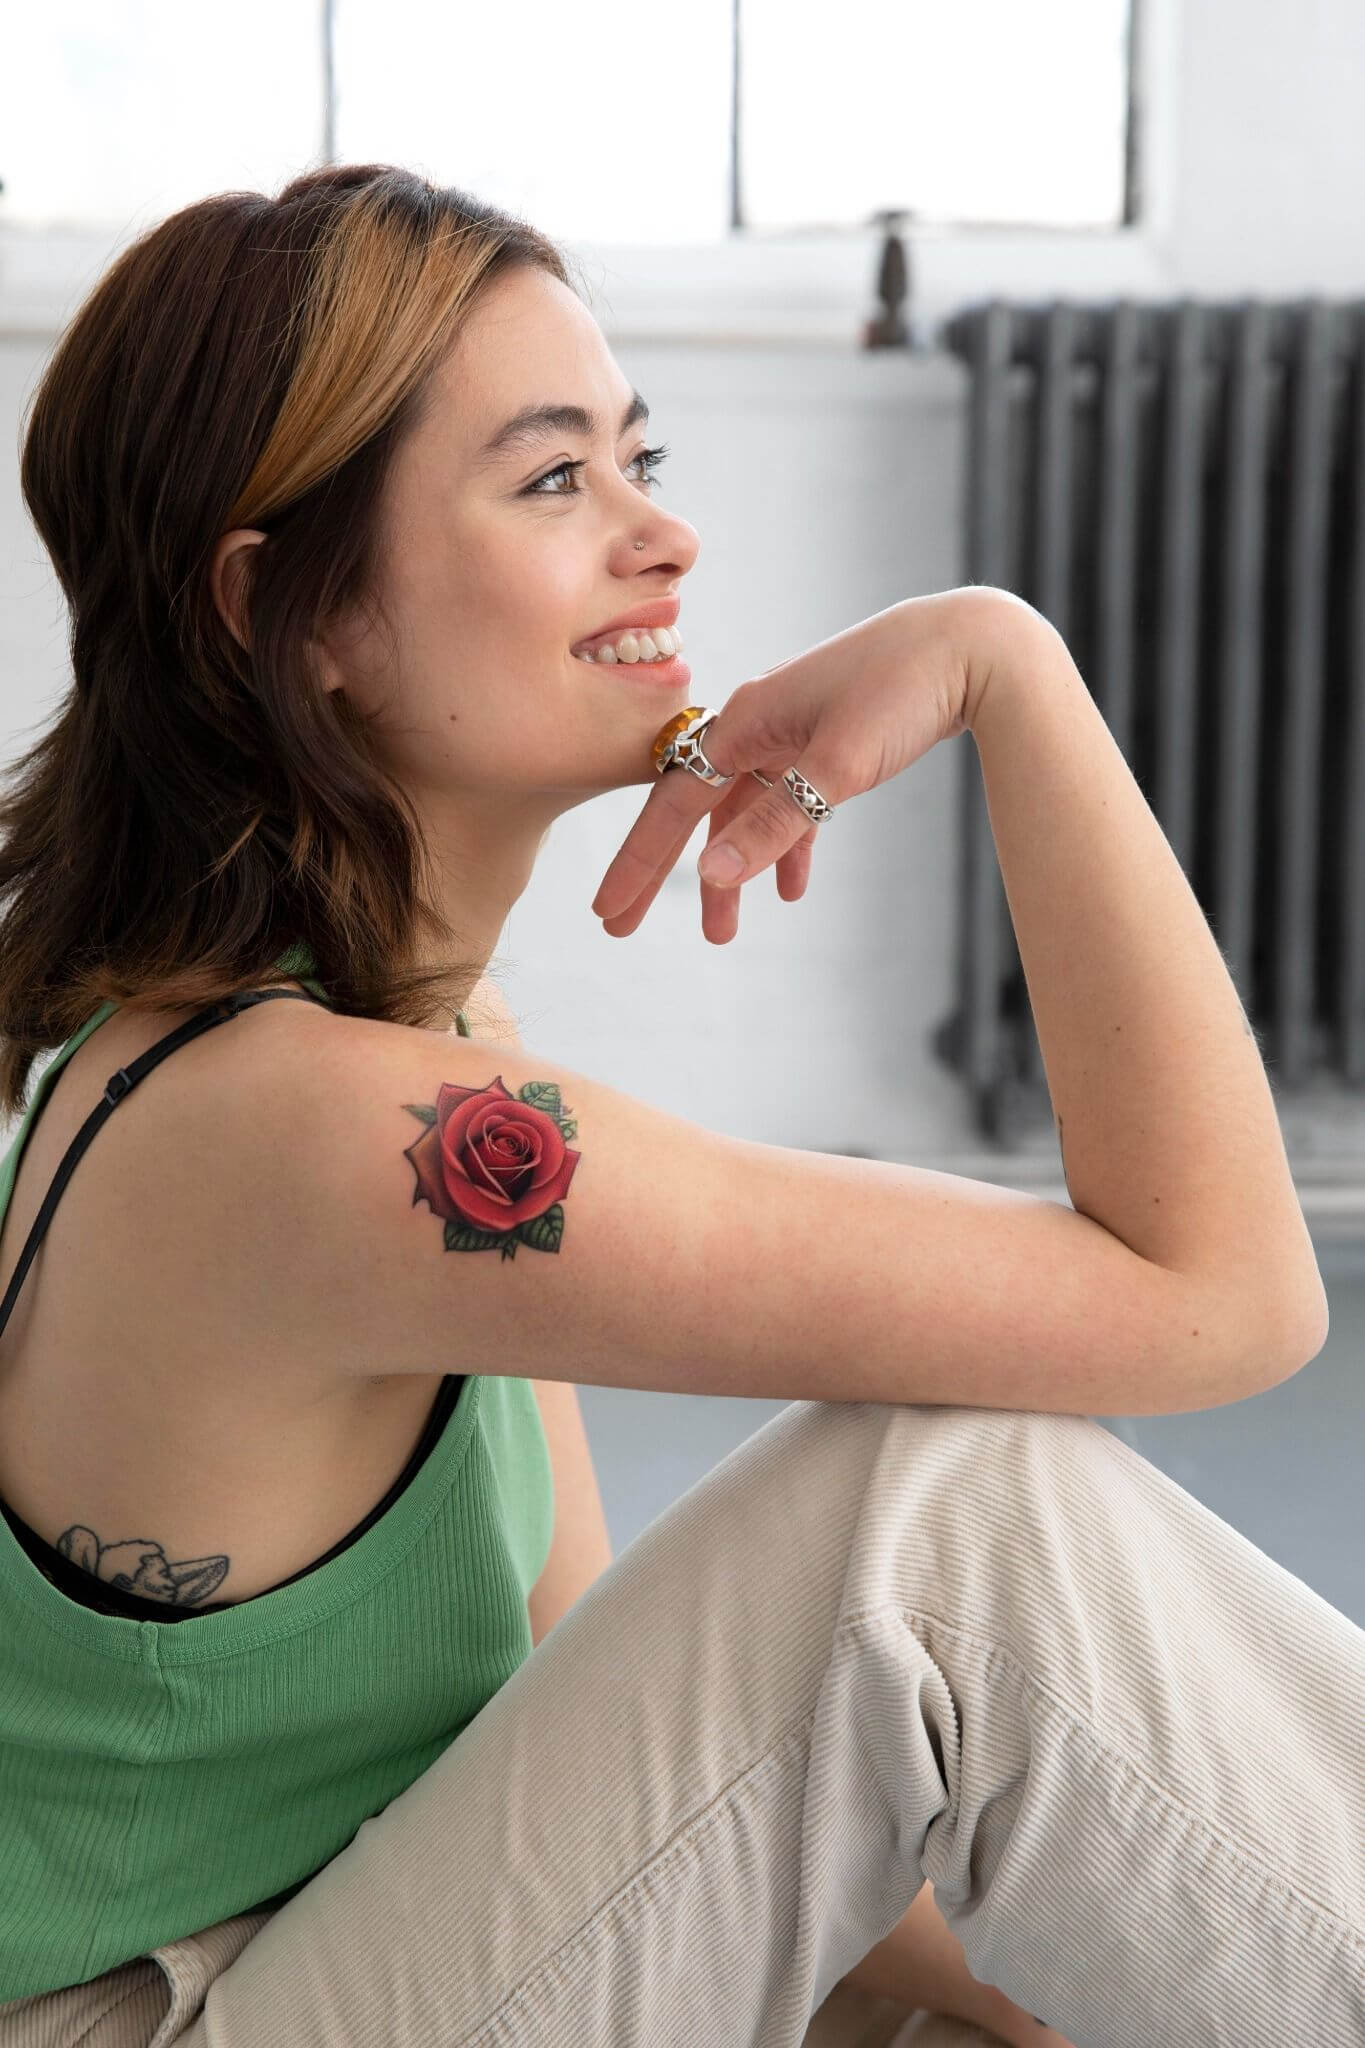 cover up a rose tattoo on woman's arm